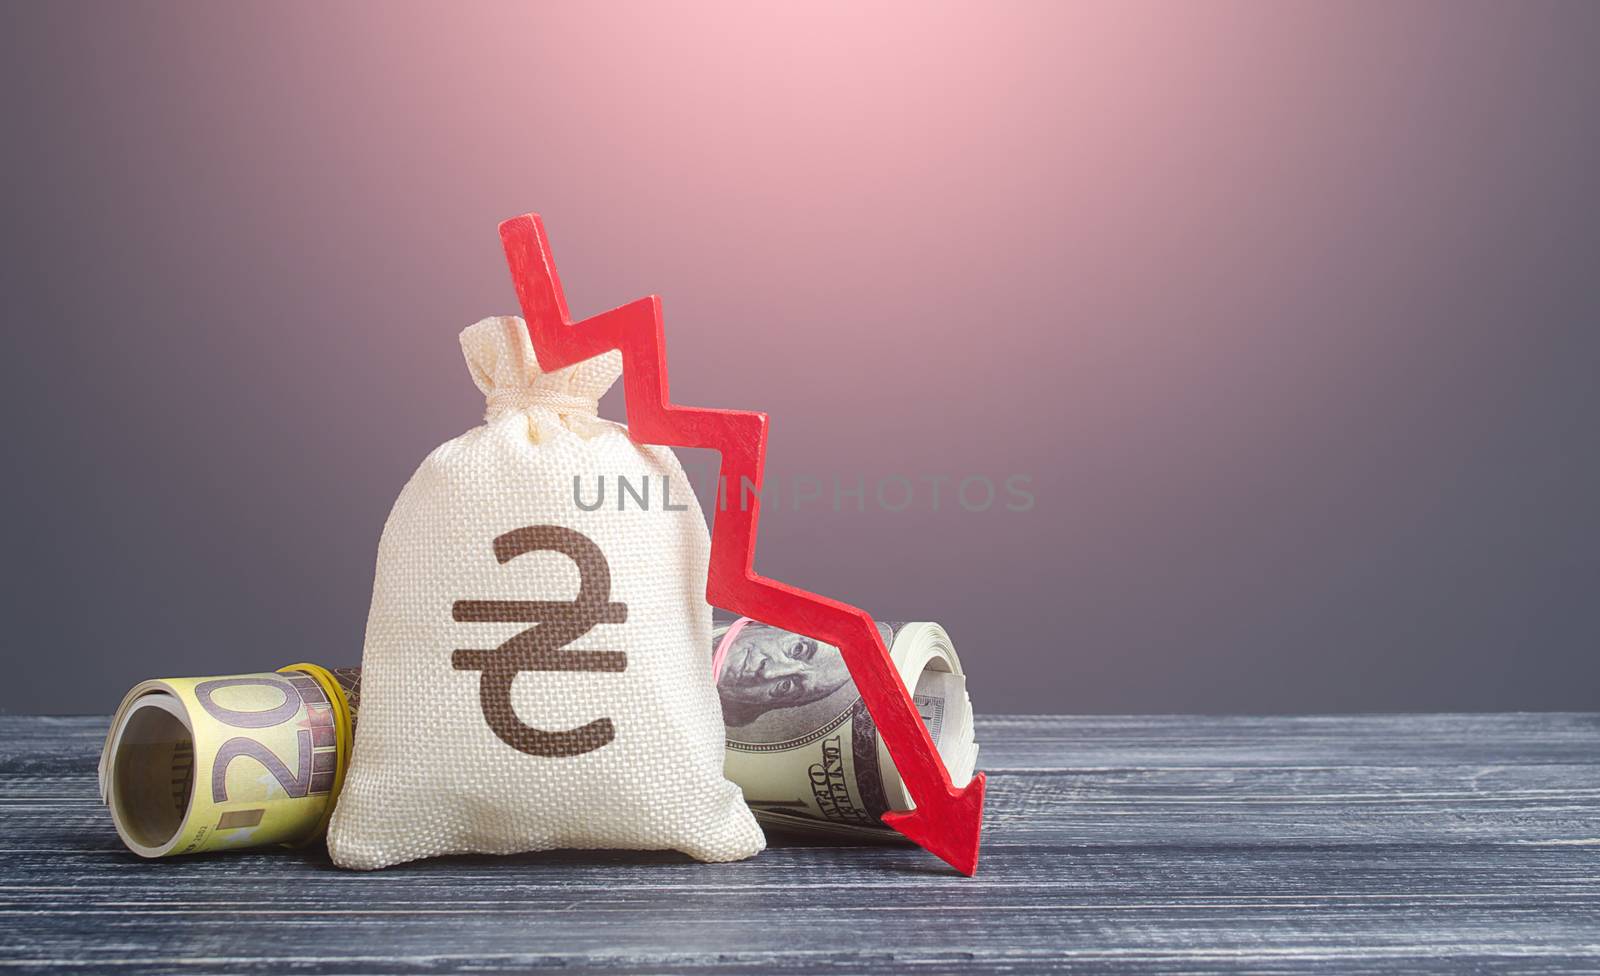 Ukrainian hryvnia money bag and red arrow down. Economic difficulties. Stagnation, recession, declining business activity, falling wealth. Crisis, loss savings. Devaluation and effects of quarantine